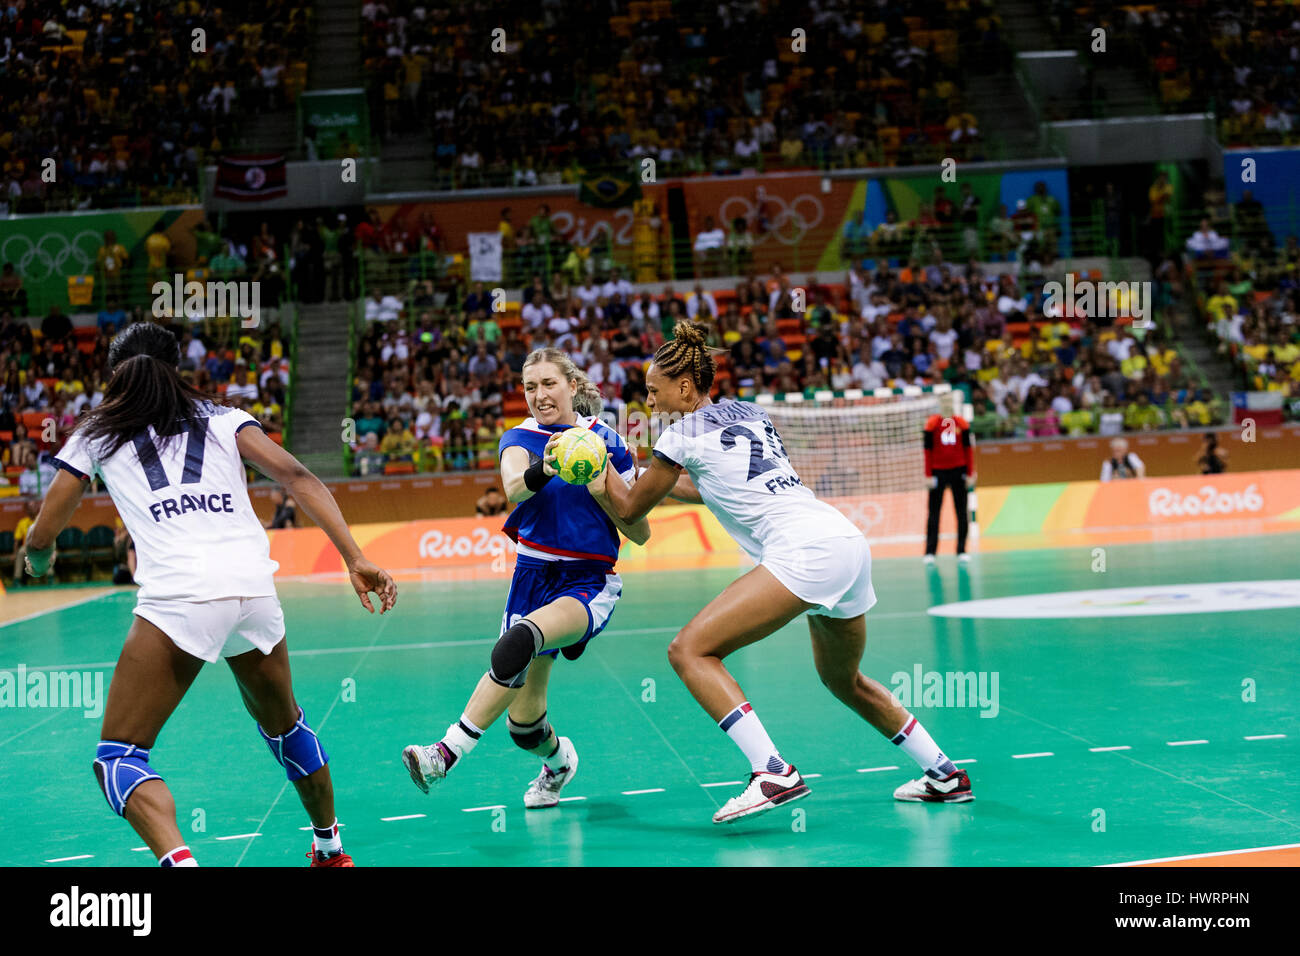 Rio de Janeiro, Brazil. 20 August 2016  Olga Akopian (RUS) #0 defended by Béatrice Edwige (FRA) #24 in the women's handball gold medal match Russia vs Stock Photo